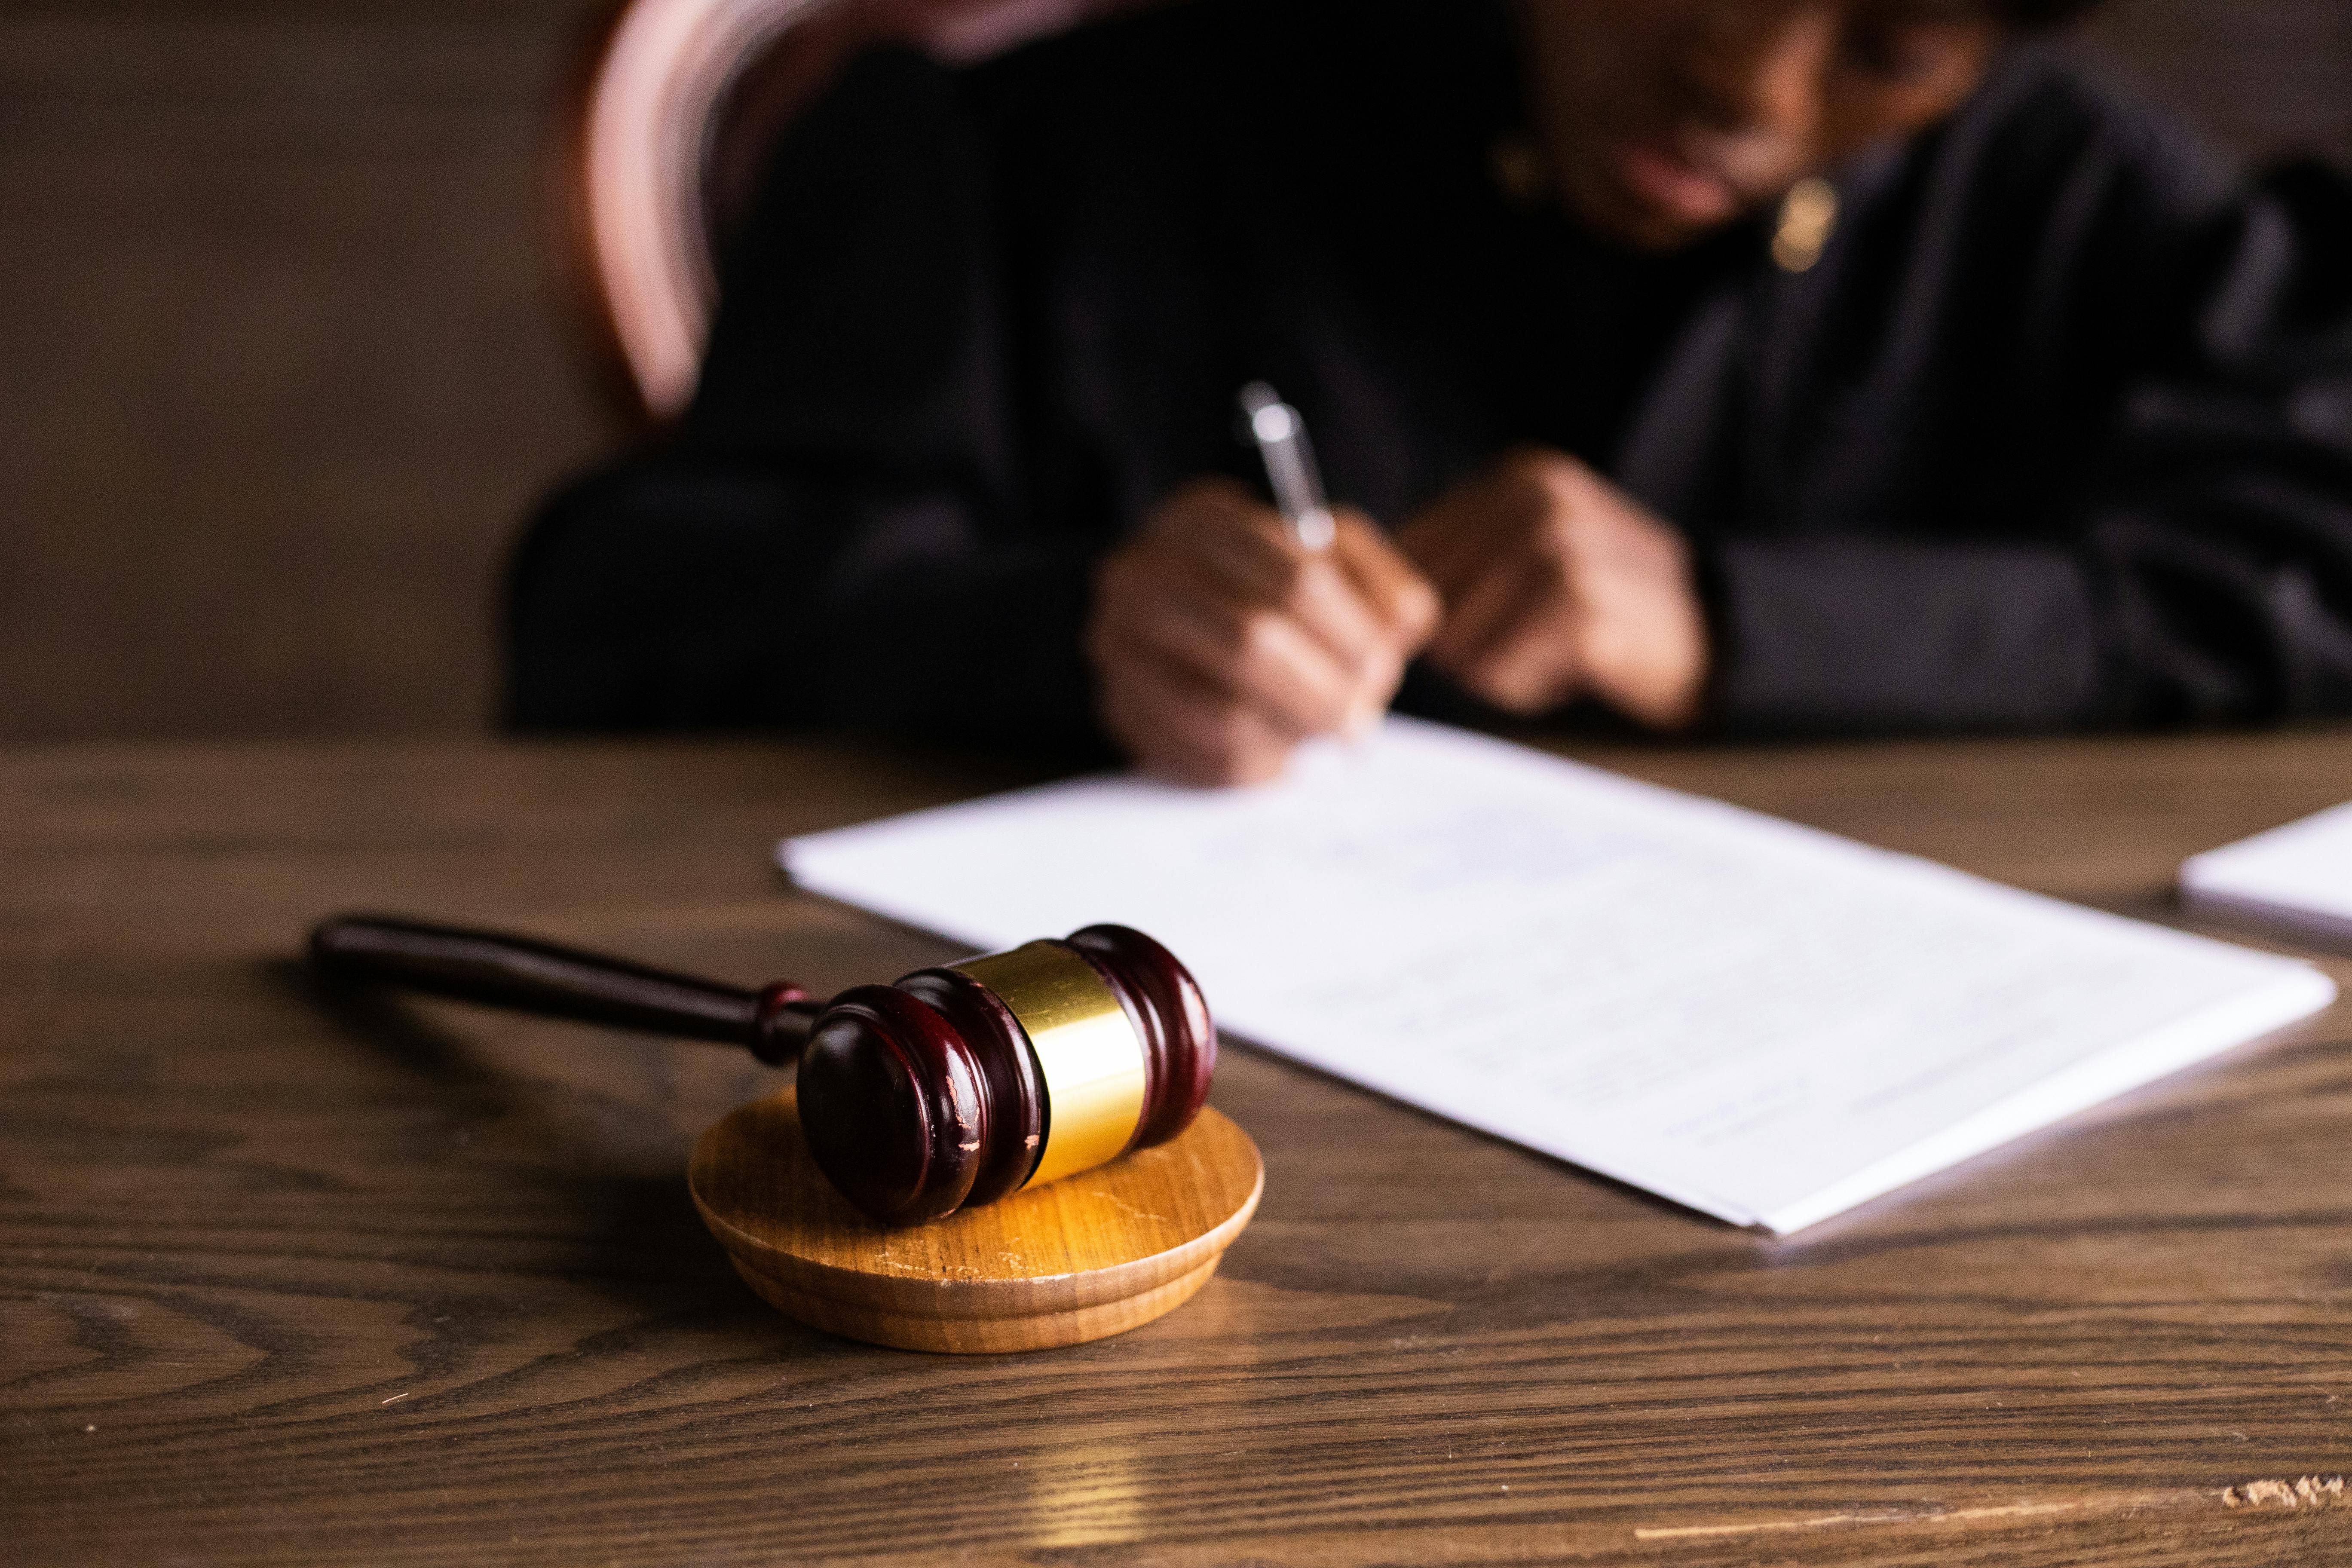 A judge signing papers | Source: Pexels